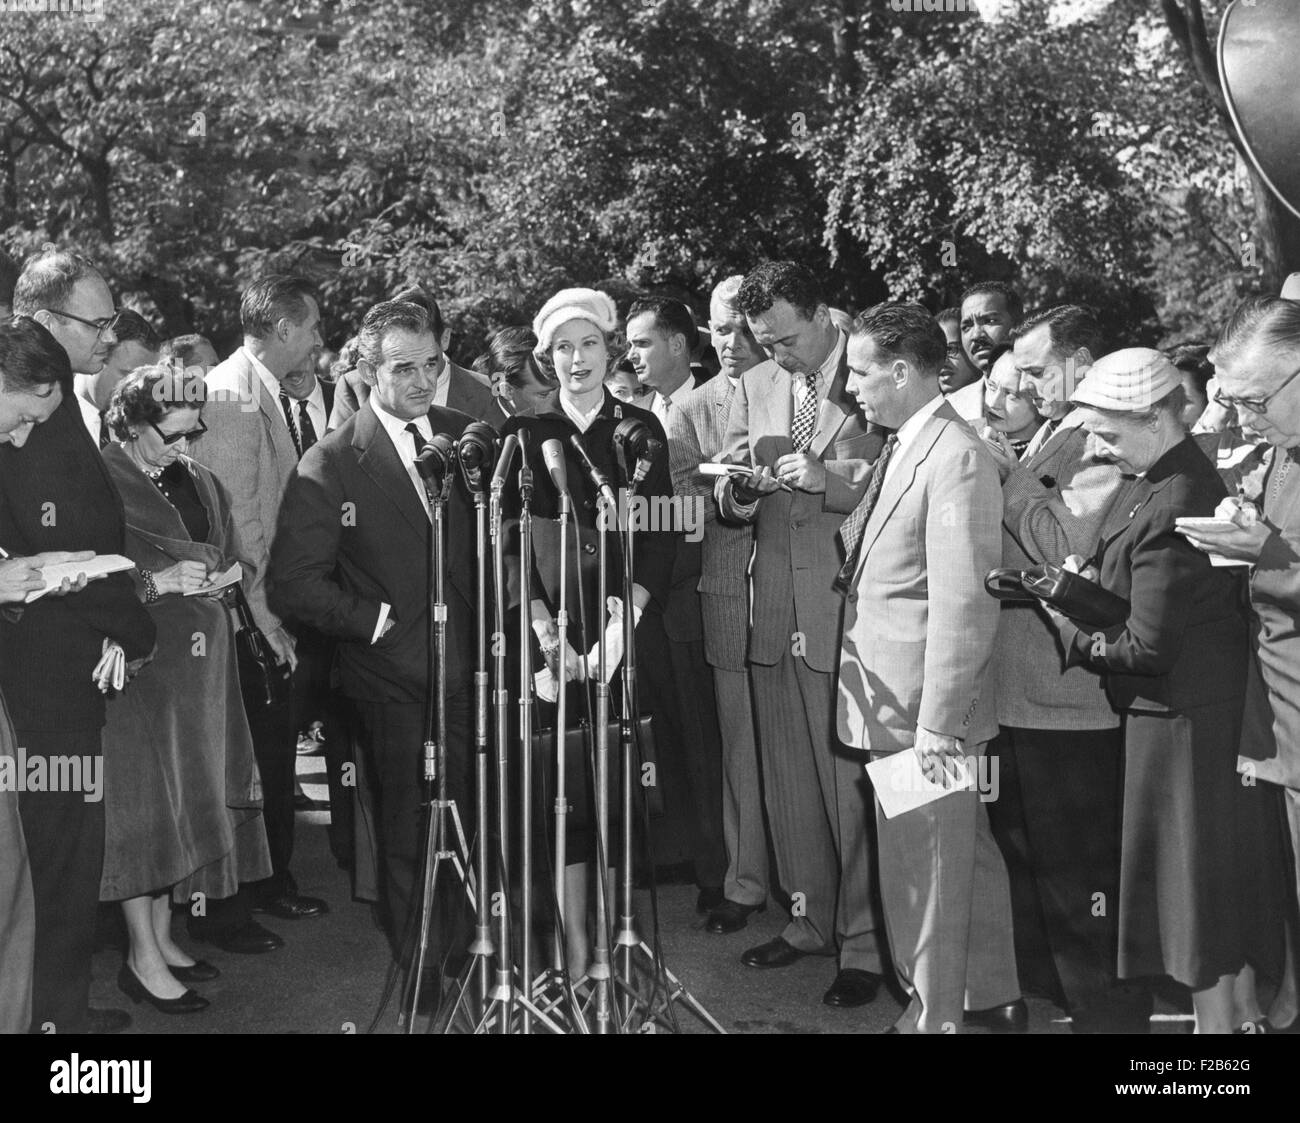 Prince Rainer and Princess Grace at Press microphones on their visit to President Eisenhower. Oct. 11, 1956. - (BSLOC 2014 16 164) Stock Photo